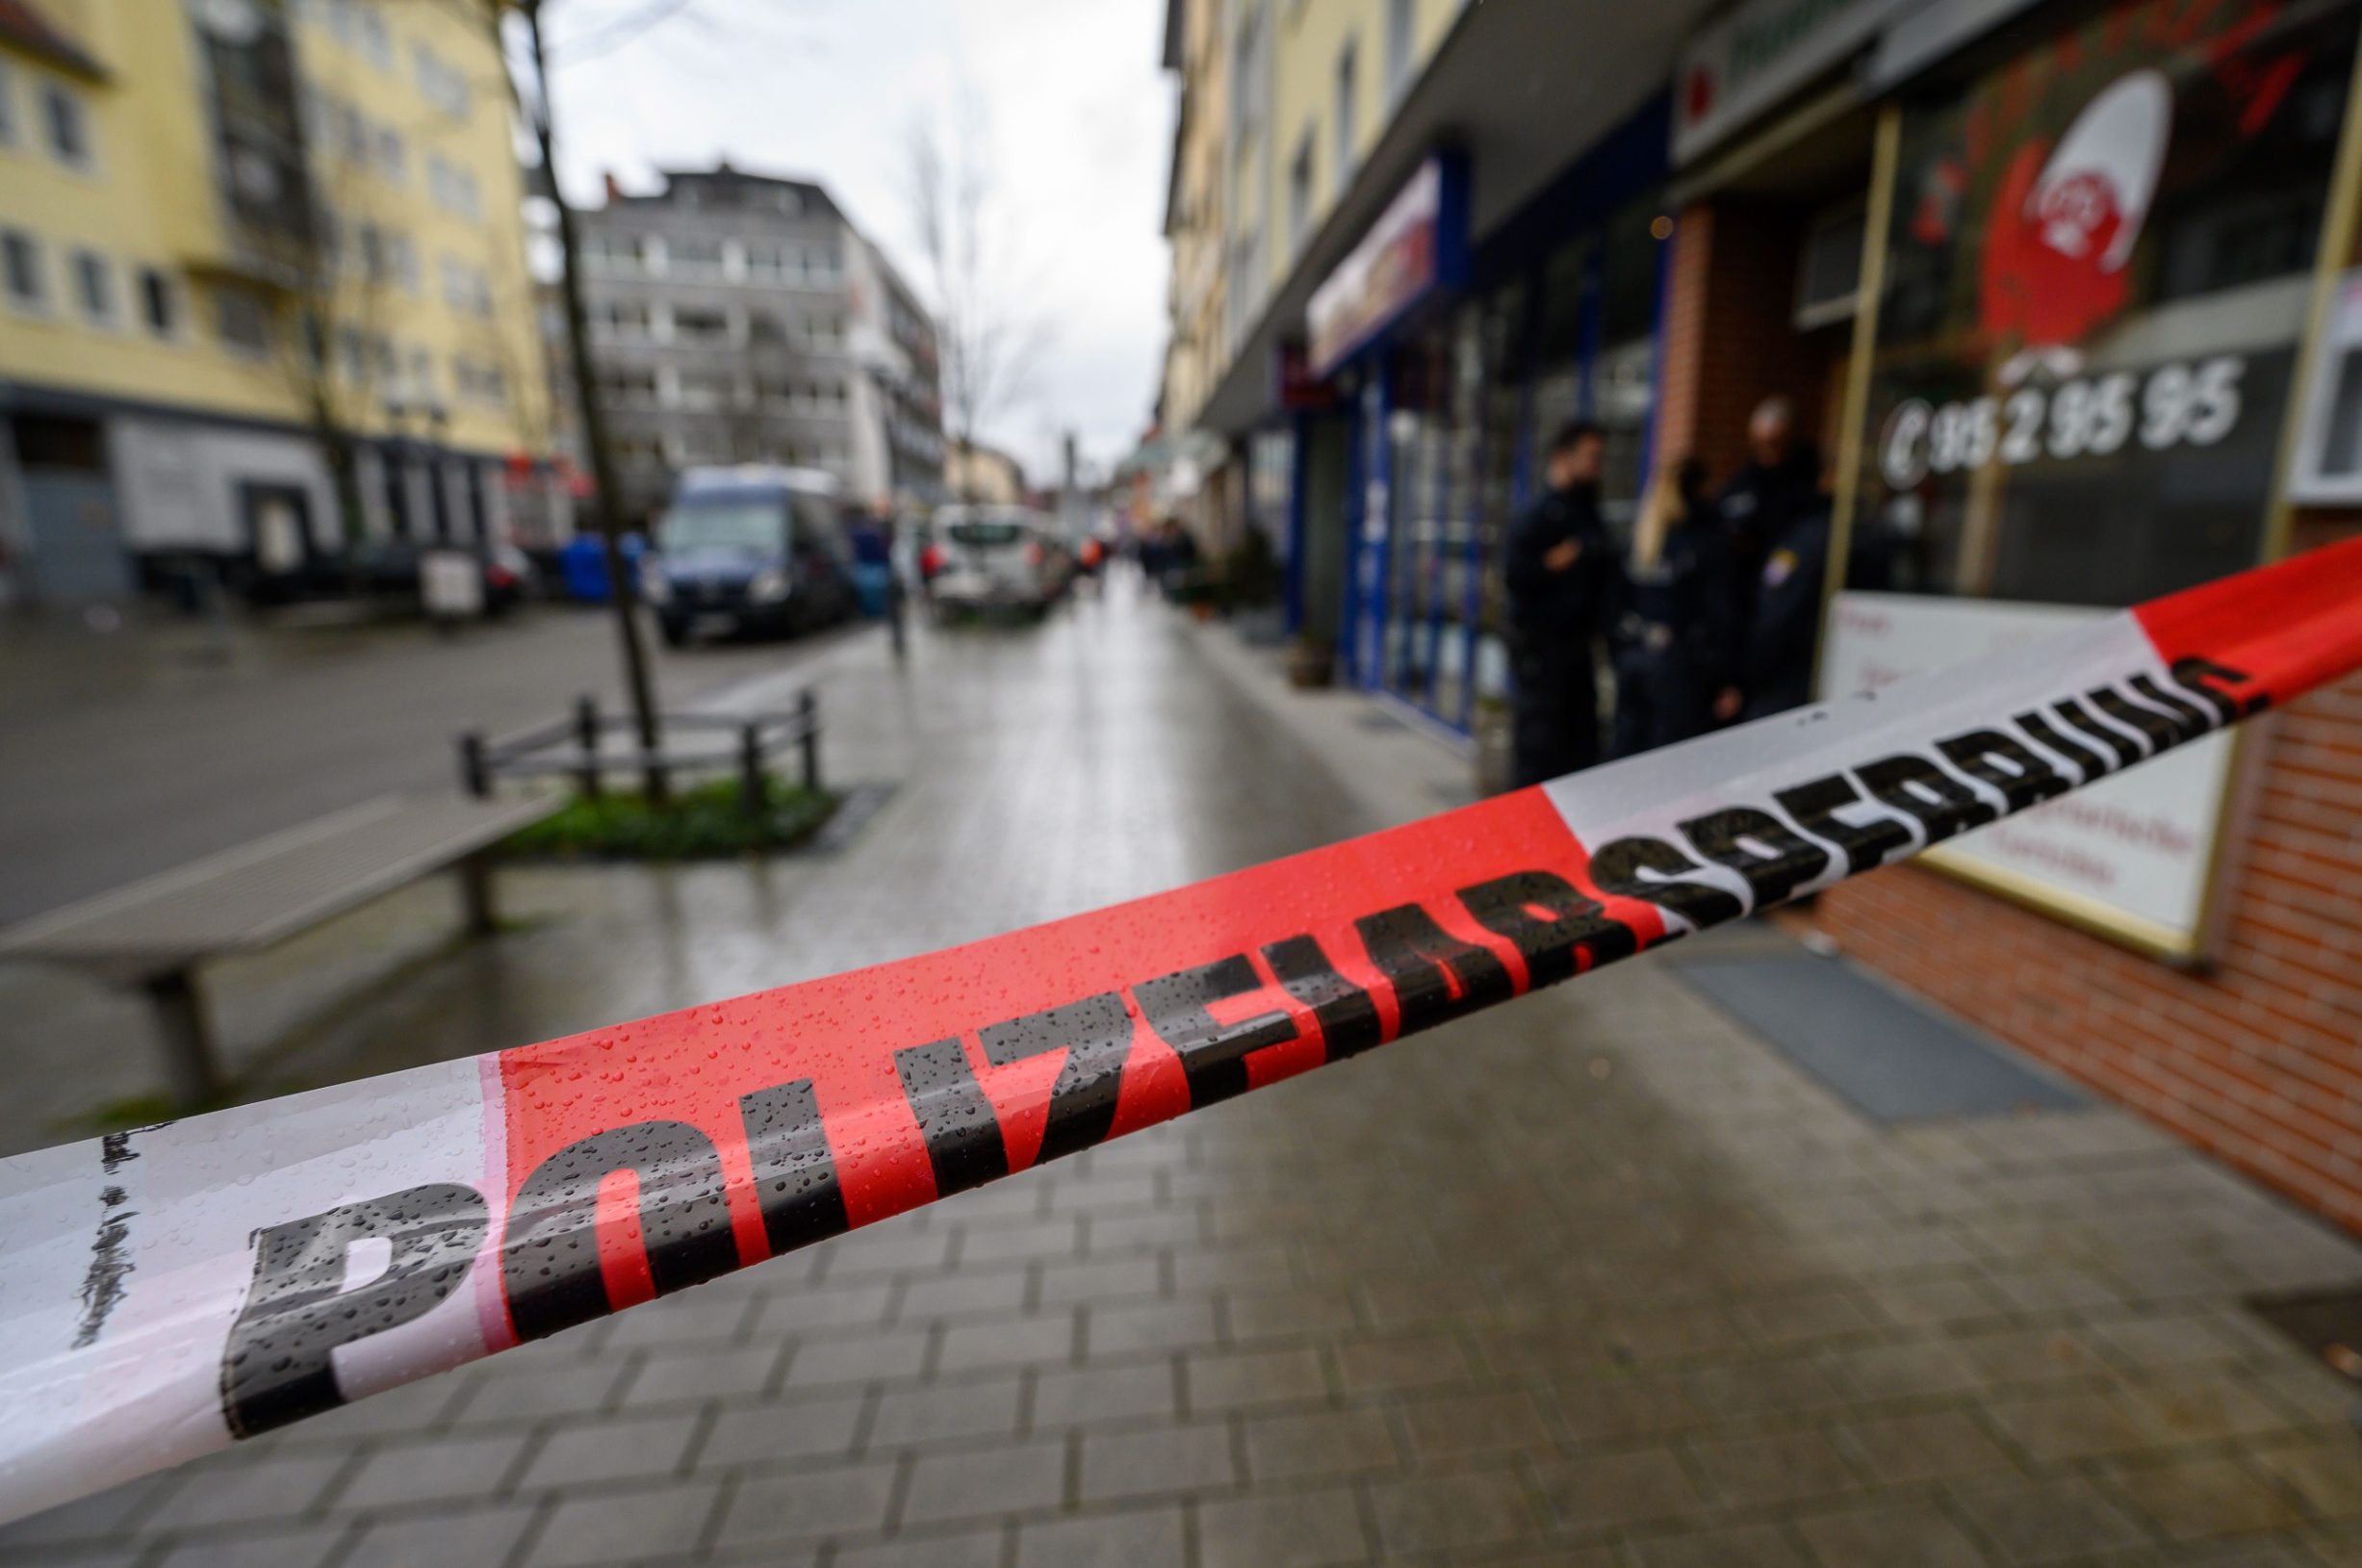 Police oficers secure a crime scene behind a police cordon in front of a bar at the Heumarkt in the centre of Hanau, near Frankfurt am Main, western Germany, on February 20, 2020, after at least nine people were killed in two shootings late on February 19, 2020. - The suspect in two shootings in Germany that killed at least nine people was found dead at home, police said on February 20, 2020. At least nine people were killed in two shootings late on February 19 in Hanau, near the German city of Frankfurt. (Photo by PATRICK HERTZOG / AFP)